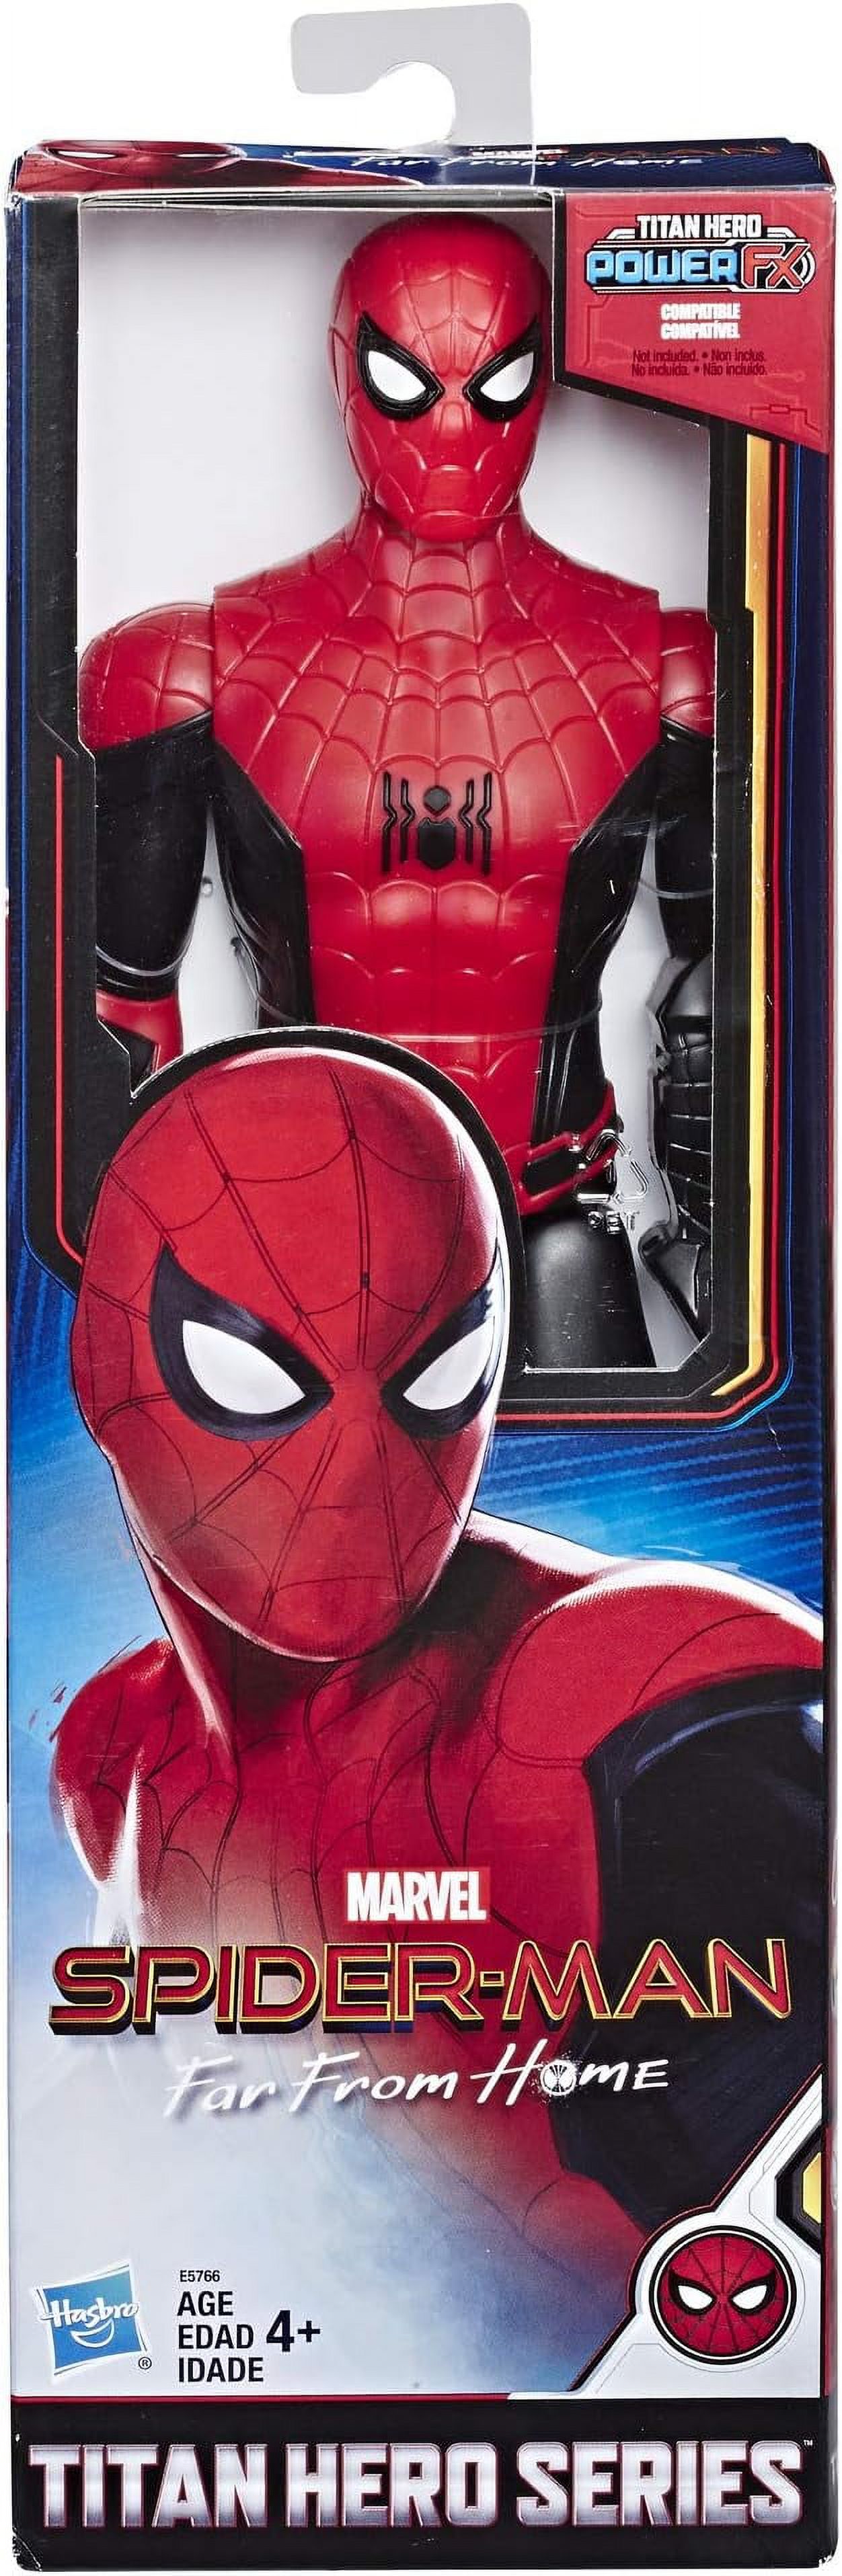 Spider-Man Far from Home Titan Hero Series Figure - image 1 of 7